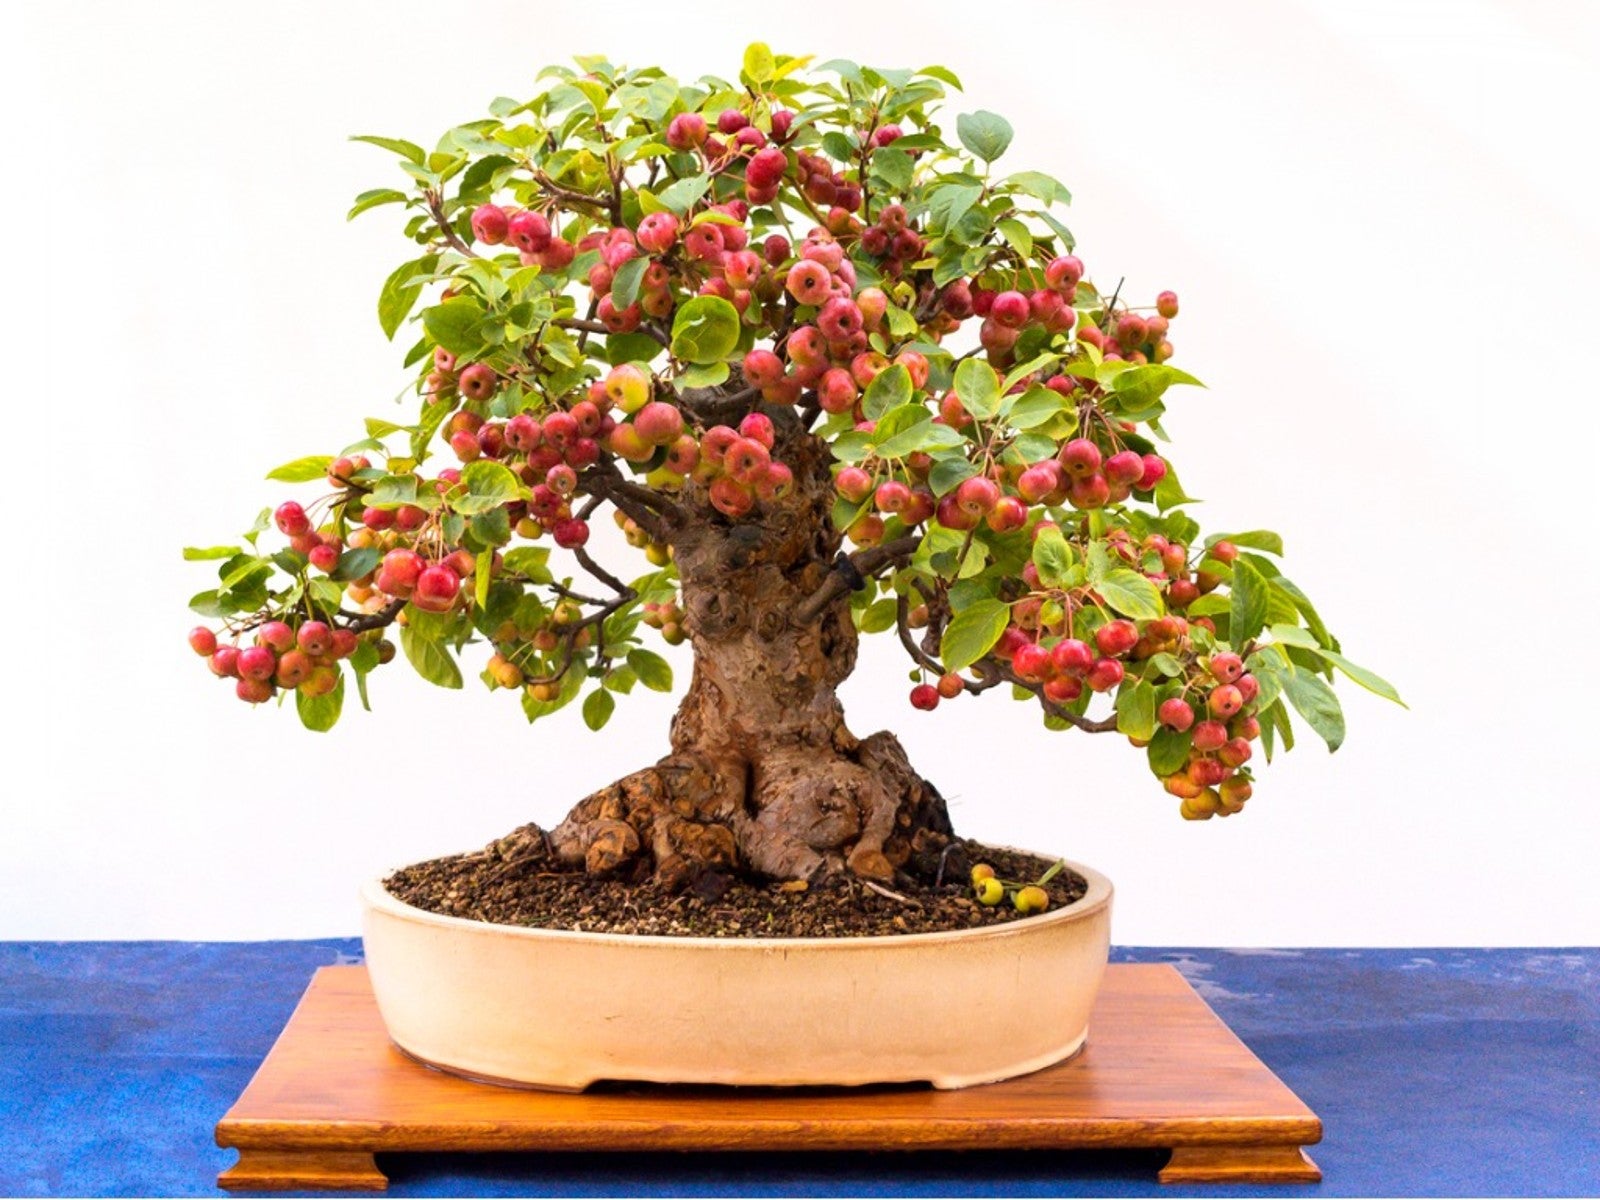 A very old looking but tiny bonsai tree with a multitude of small apples growing on it